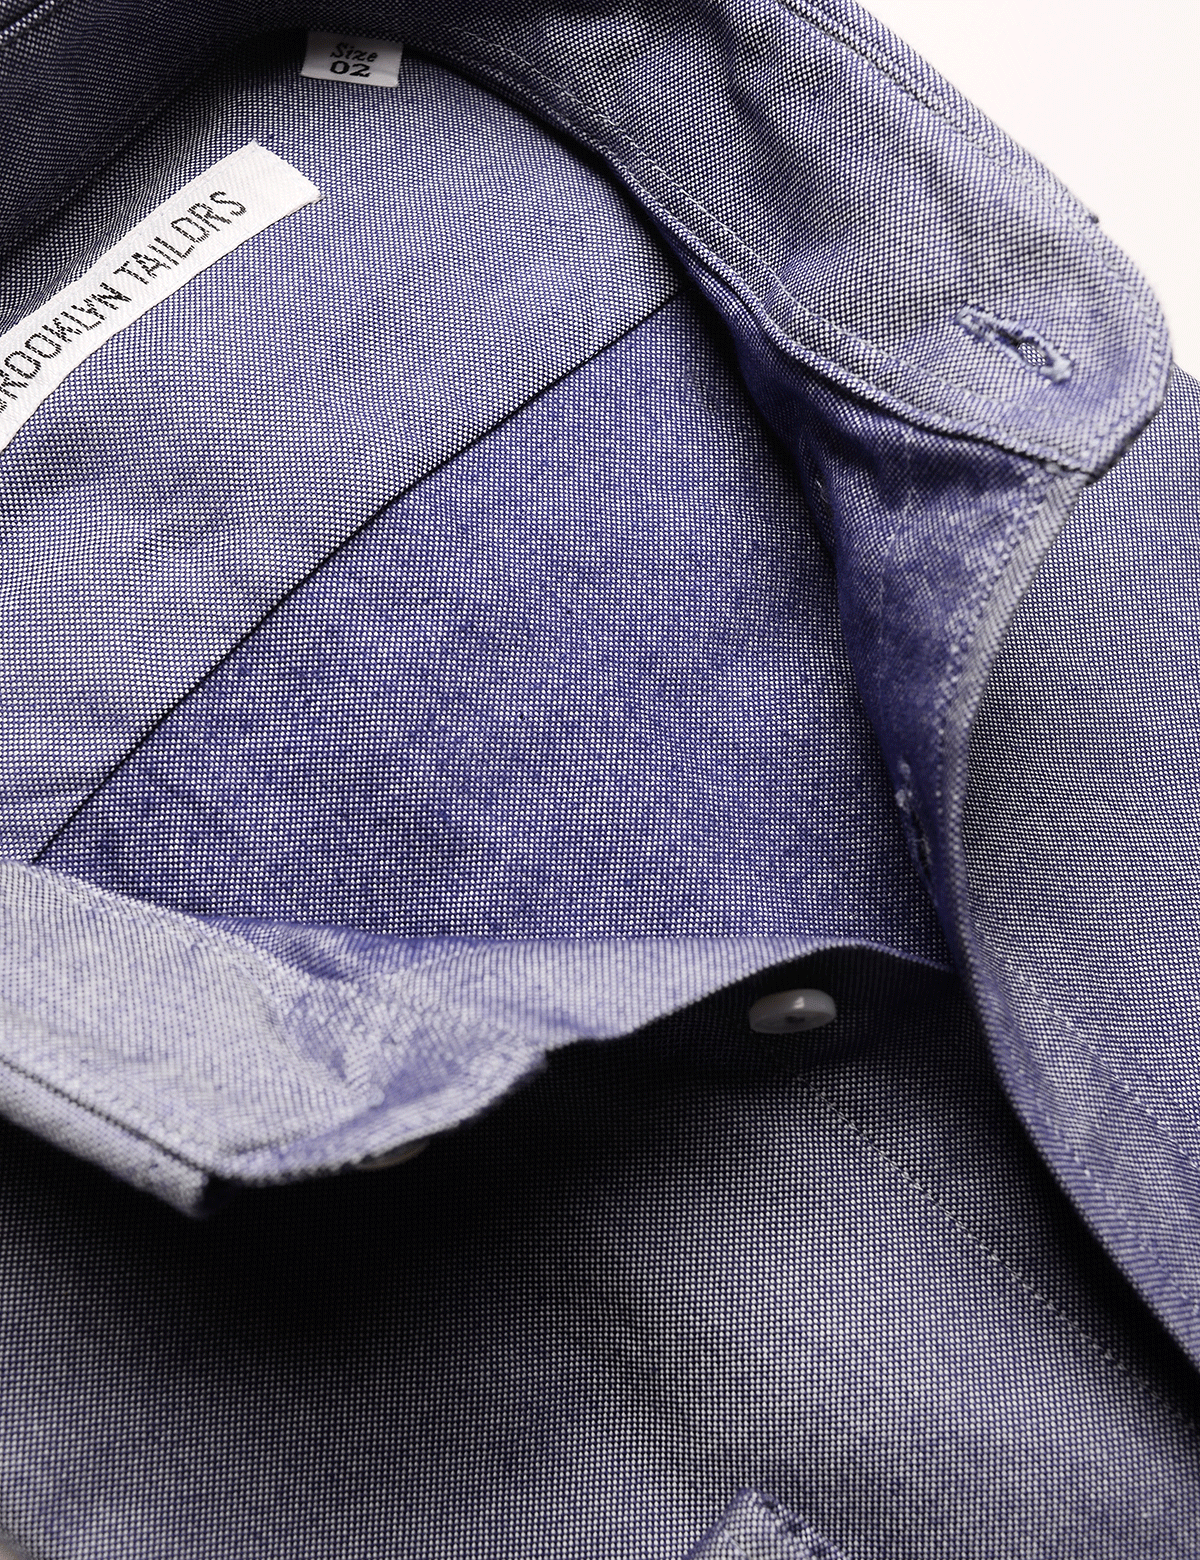 Detail shot of Brooklyn Tailors BKT10 Slim Casual Shirt in Fall Oxford - Deep Blue open collar showing interior fabric texture